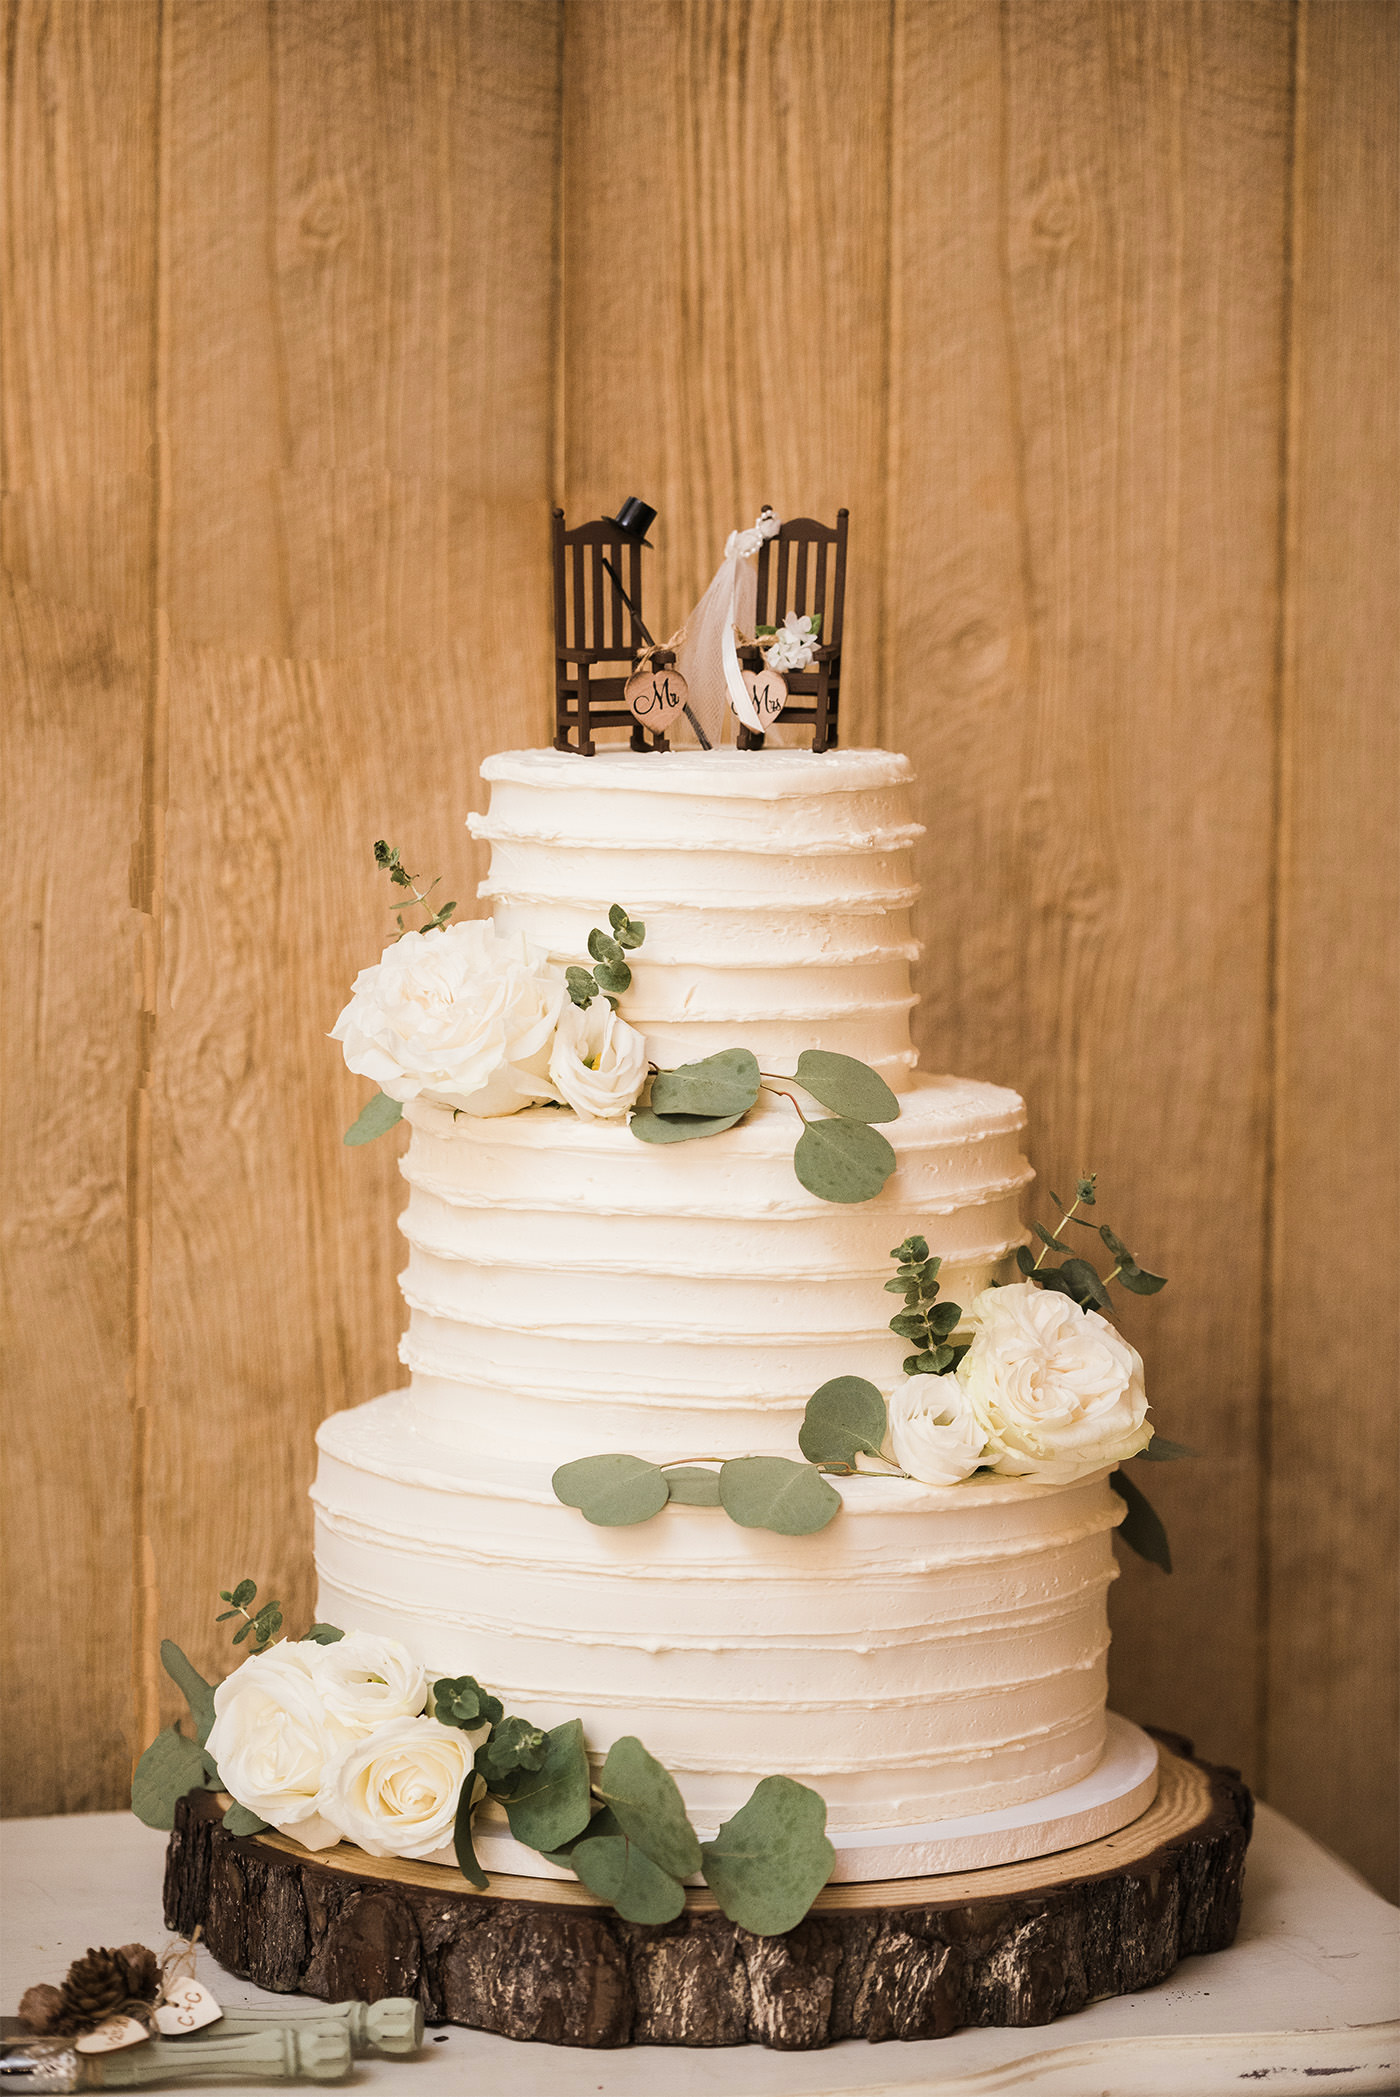 Rustic Chic Three Tier Wedding Cake with White Buttercream Frosting, Horizontal White Stripes, Rose Floral Accents, His and Her Rocking Chair Cake Topper, Wooden Tree Truck Cake Stand